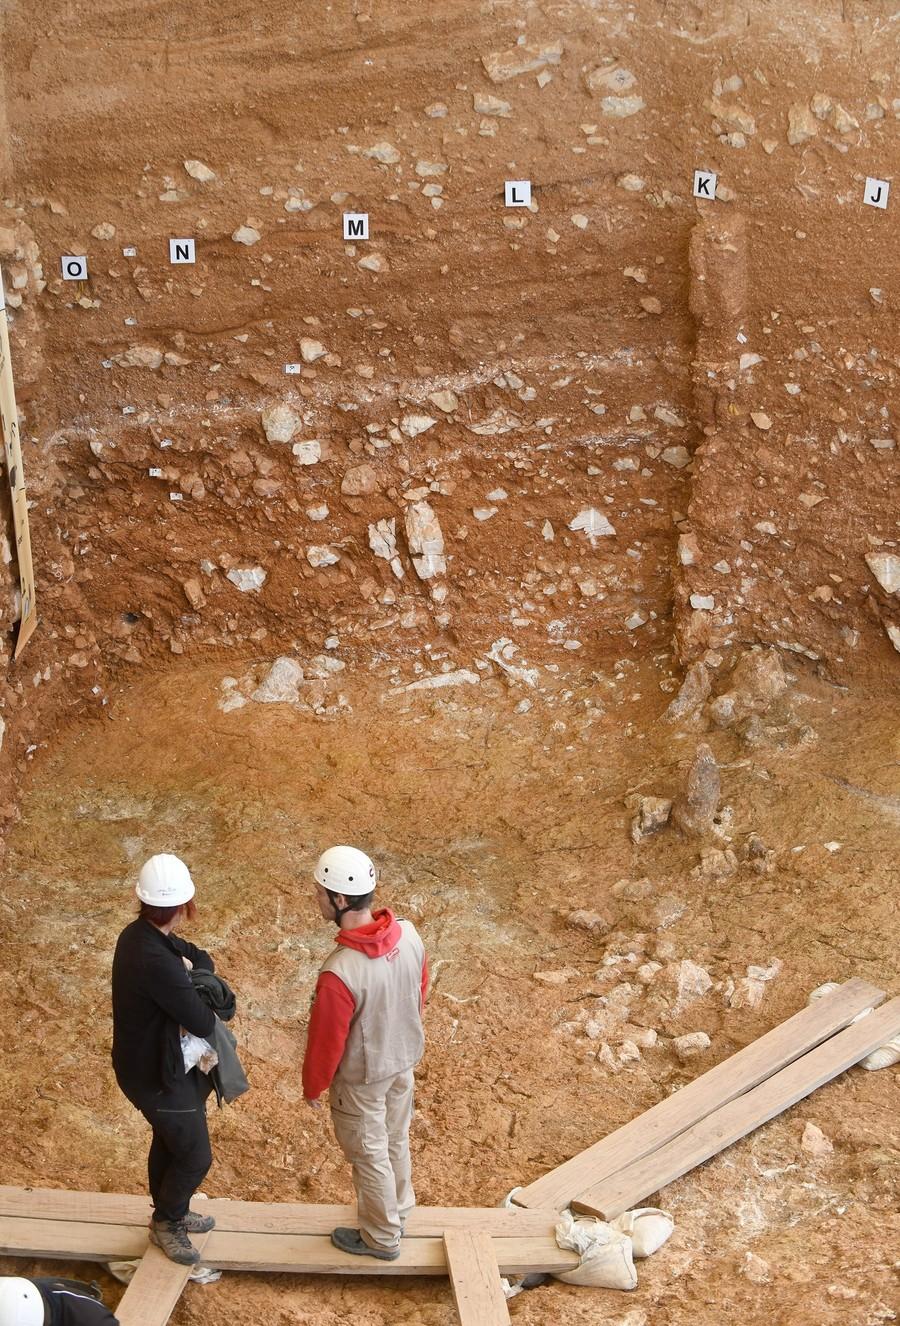 The new (and promising) excavation campaign begins in Atapuerca